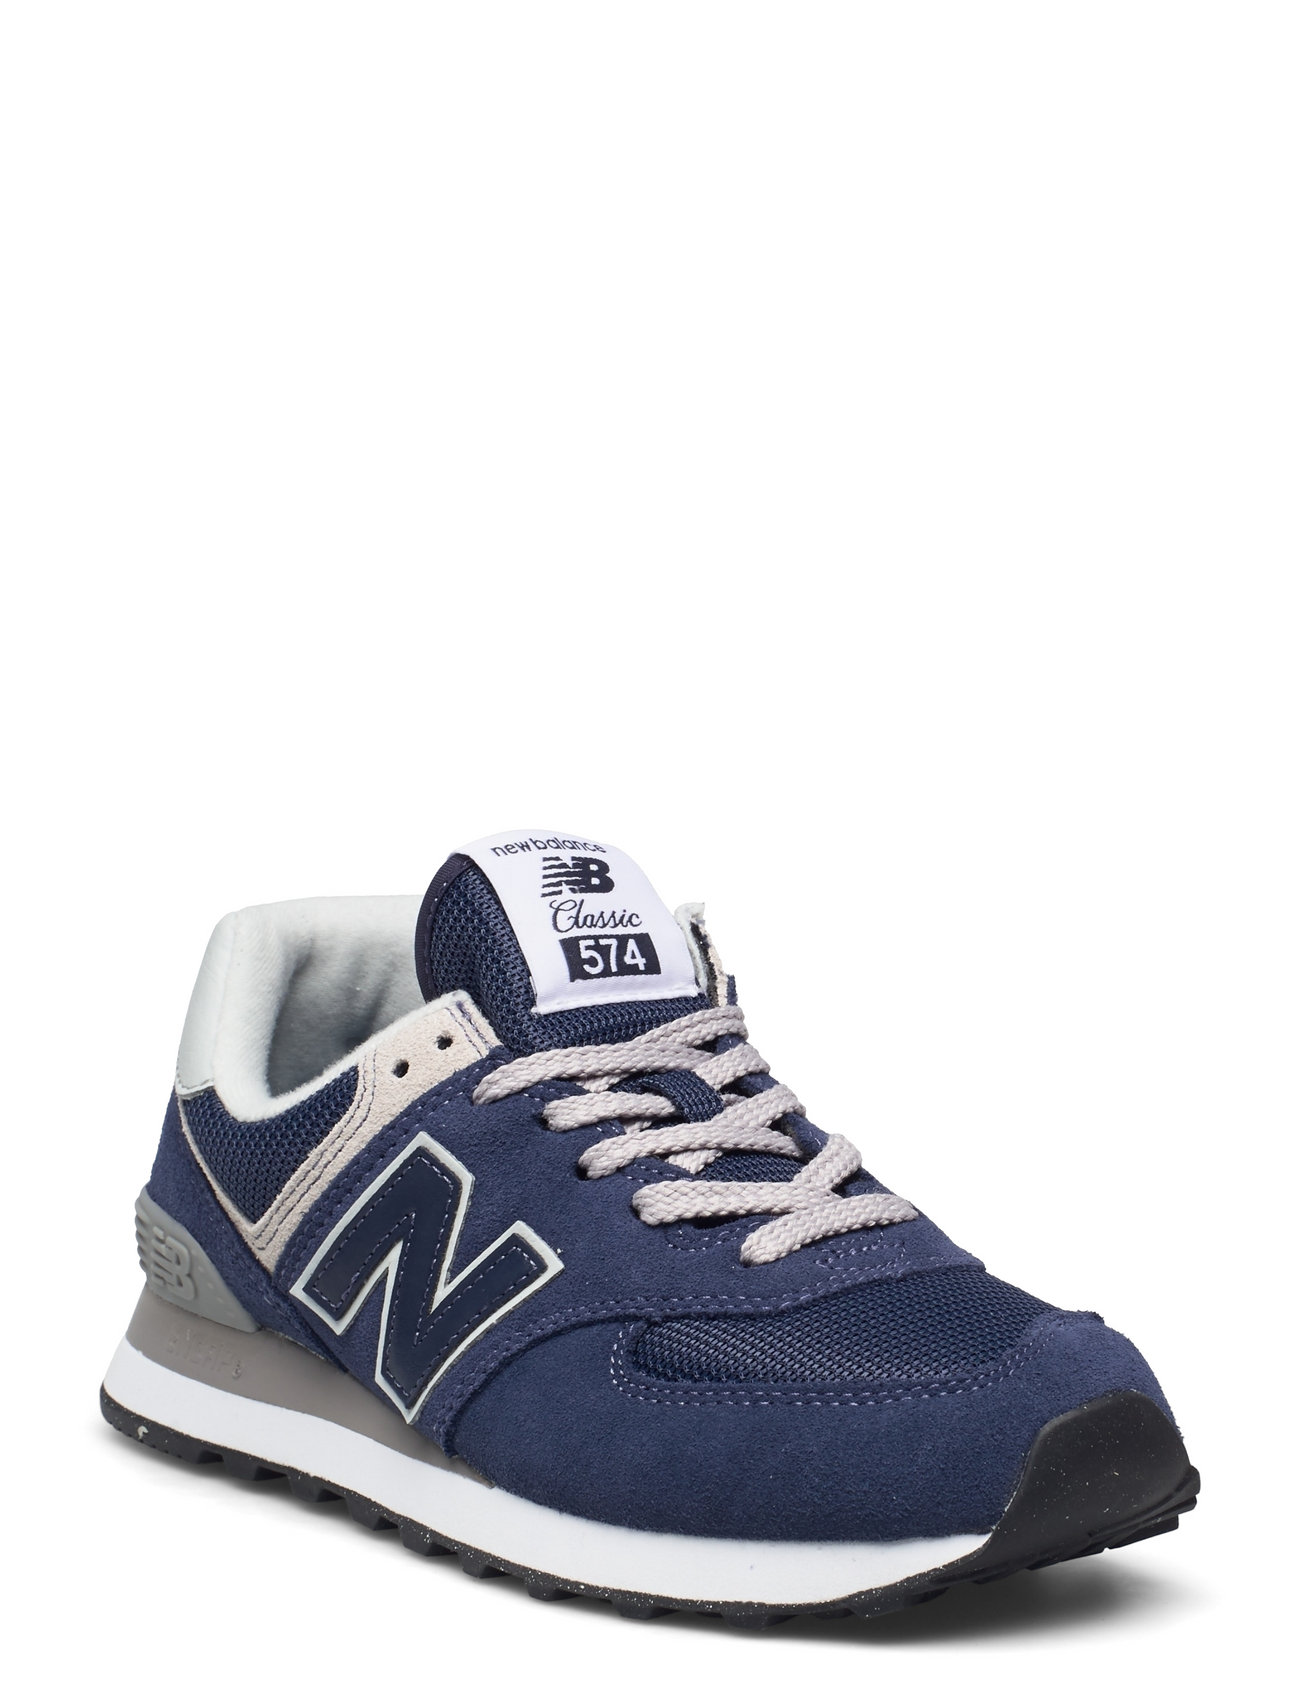 New Balance 574 Sport Sneakers Low-top Sneakers Navy New Balance